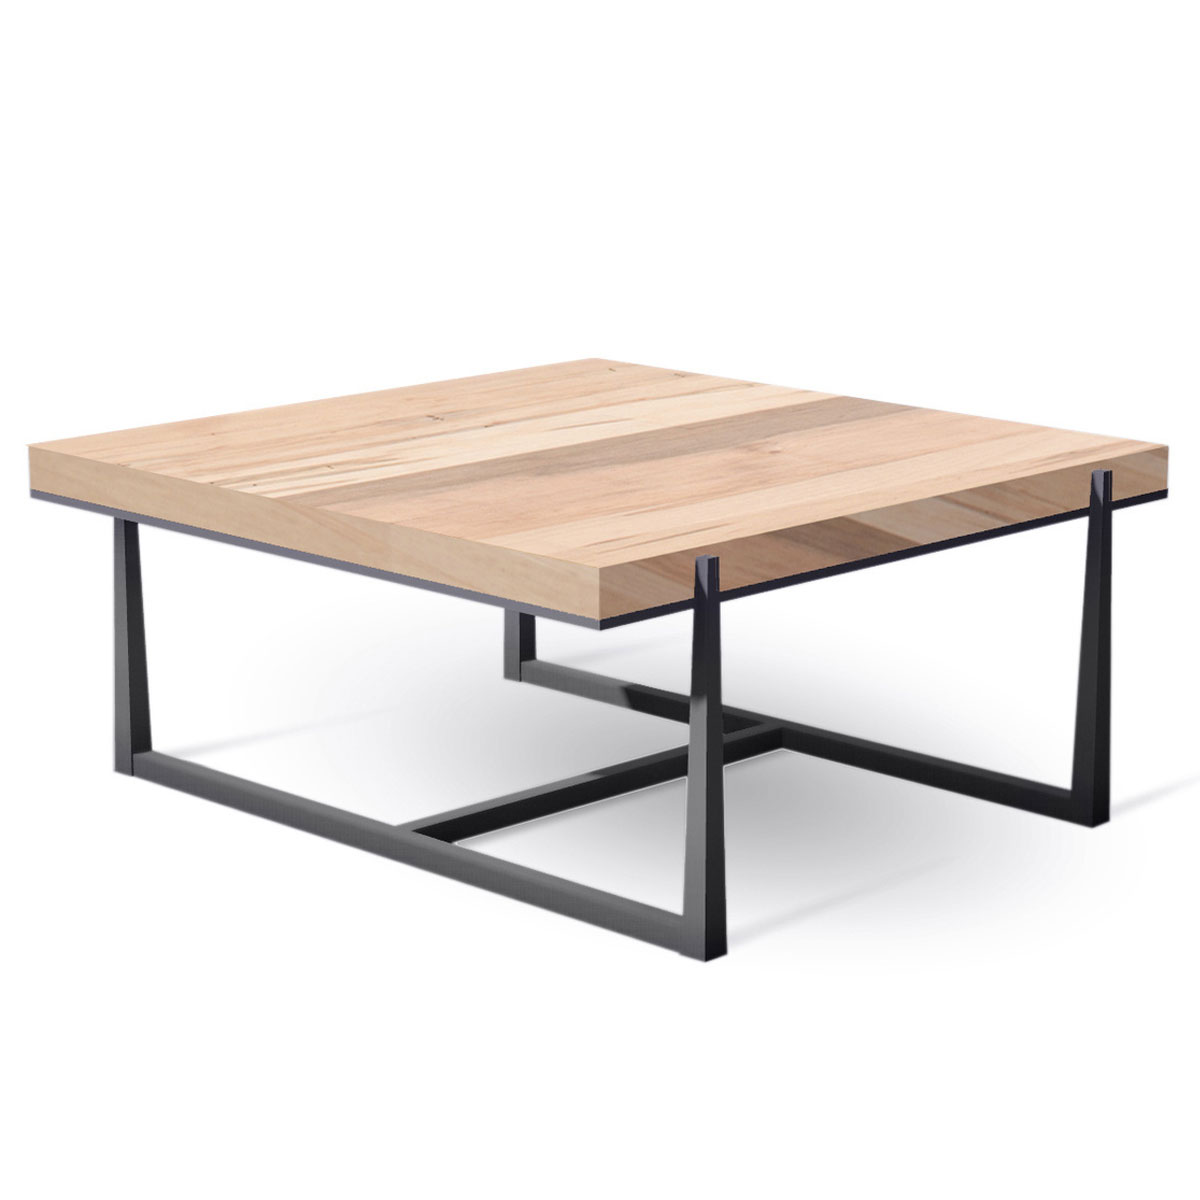 Charleston Forge Cooper 54 inch Square Cocktail Table